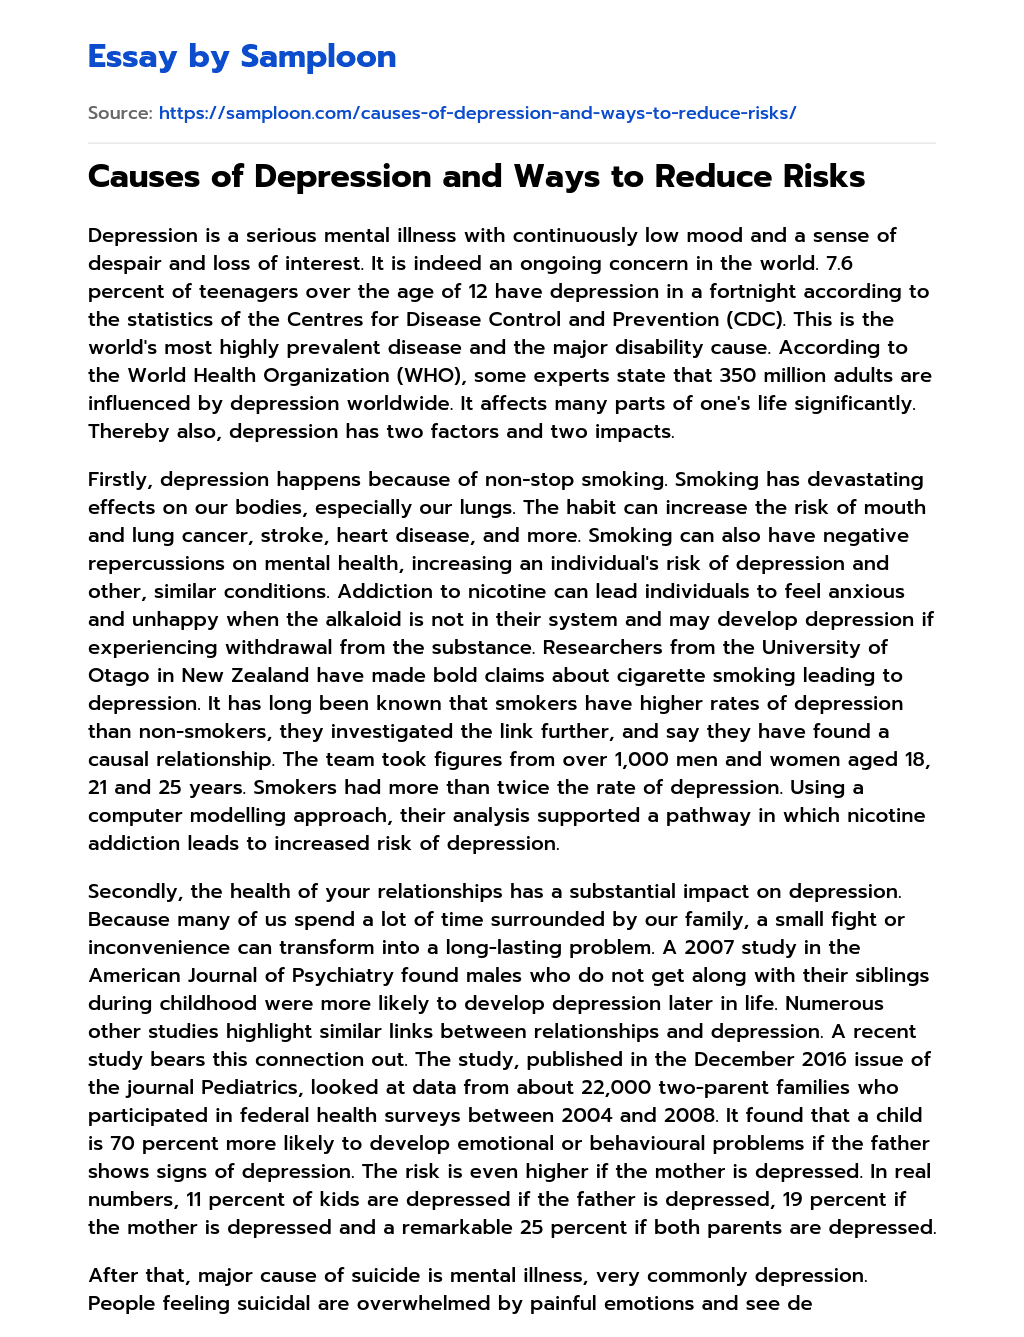 Causes of Depression and Ways to Reduce Risks essay